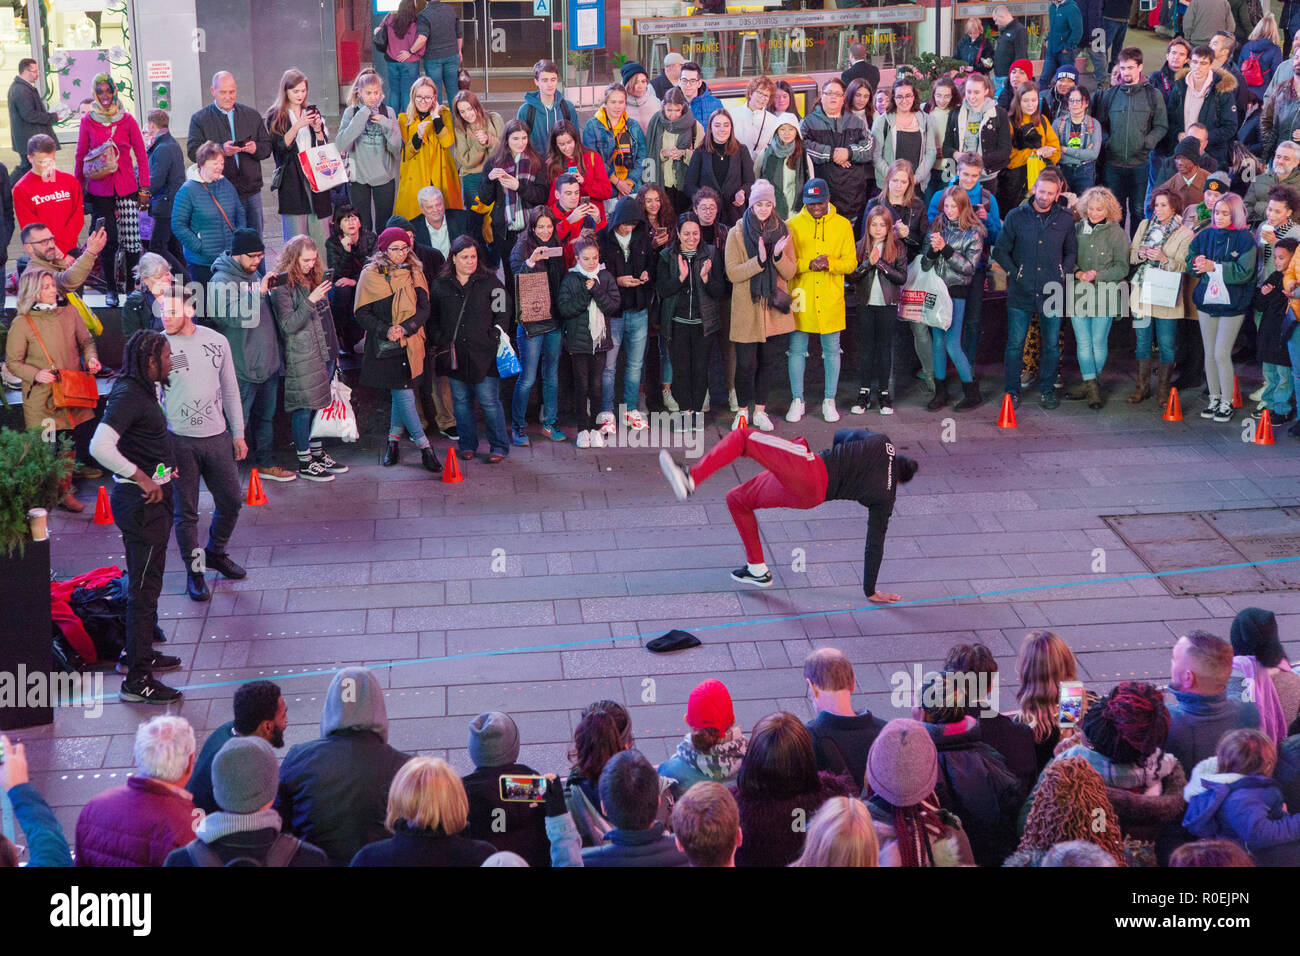 Break dancers at Time Square, New York City, United States of America. Stock Photo